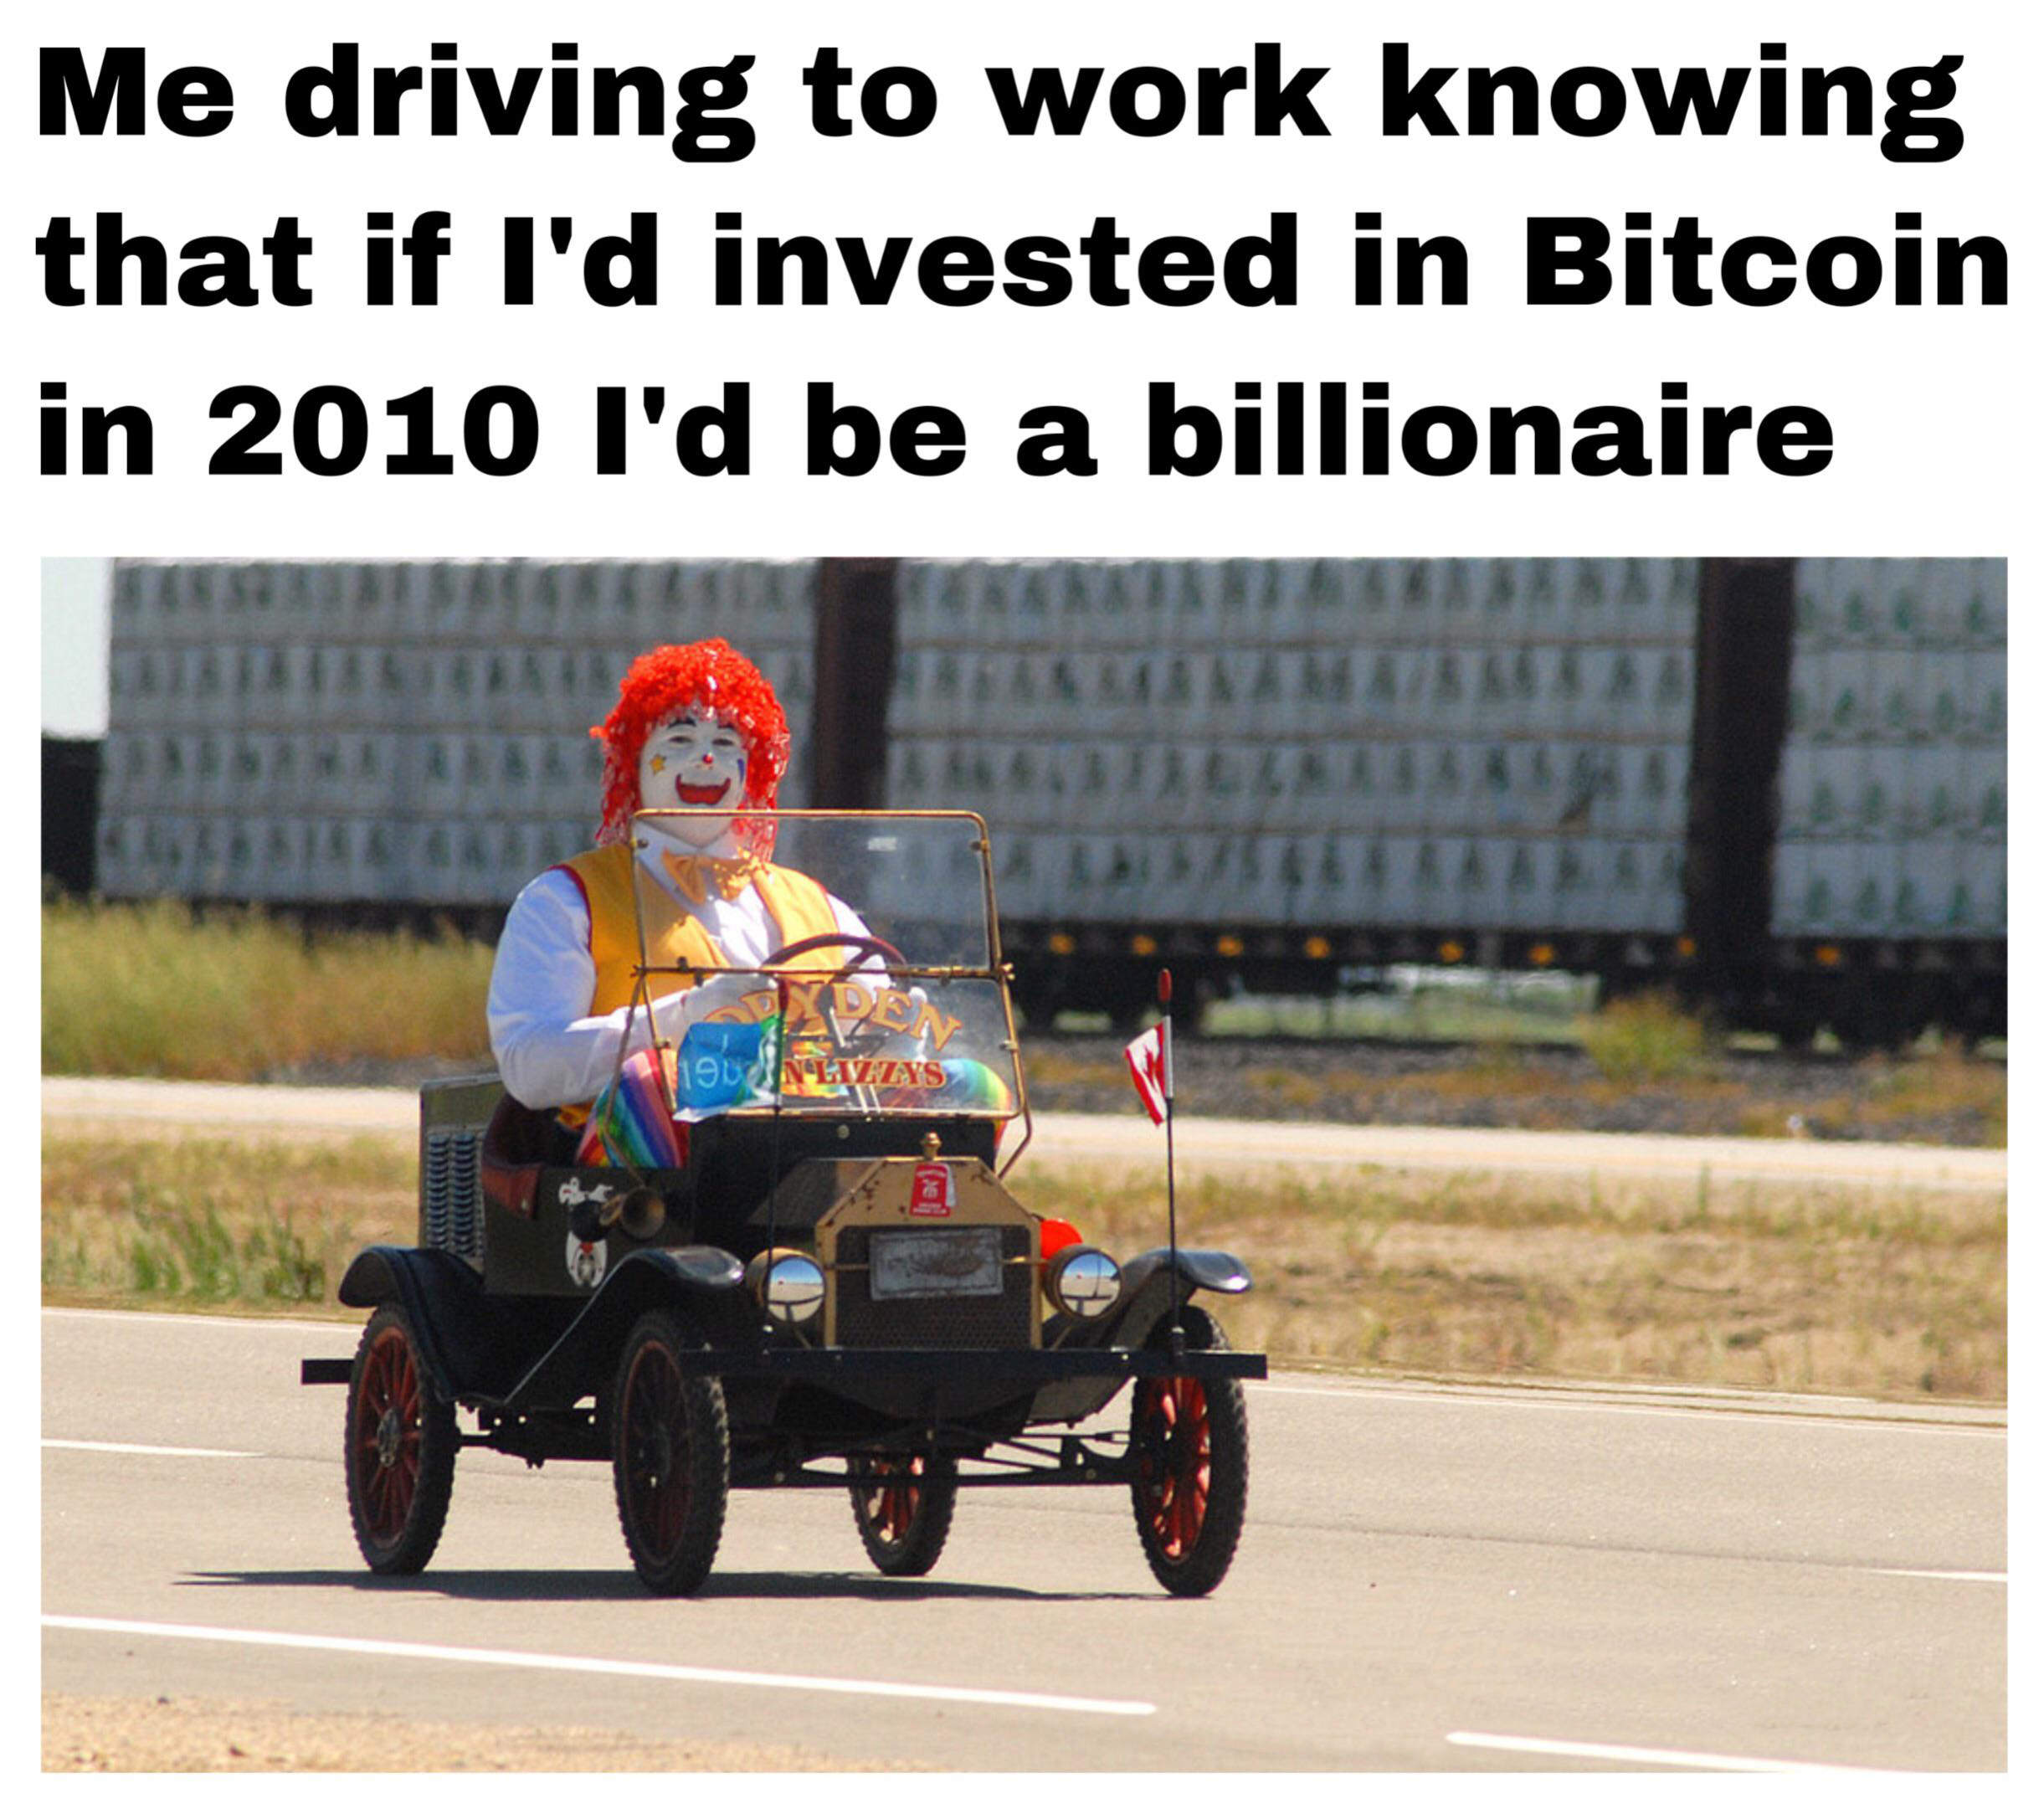 monday morning randomness - car - Me driving to work knowing that if I'd invested in Bitcoin in 2010 I'd be a billionaire 1907